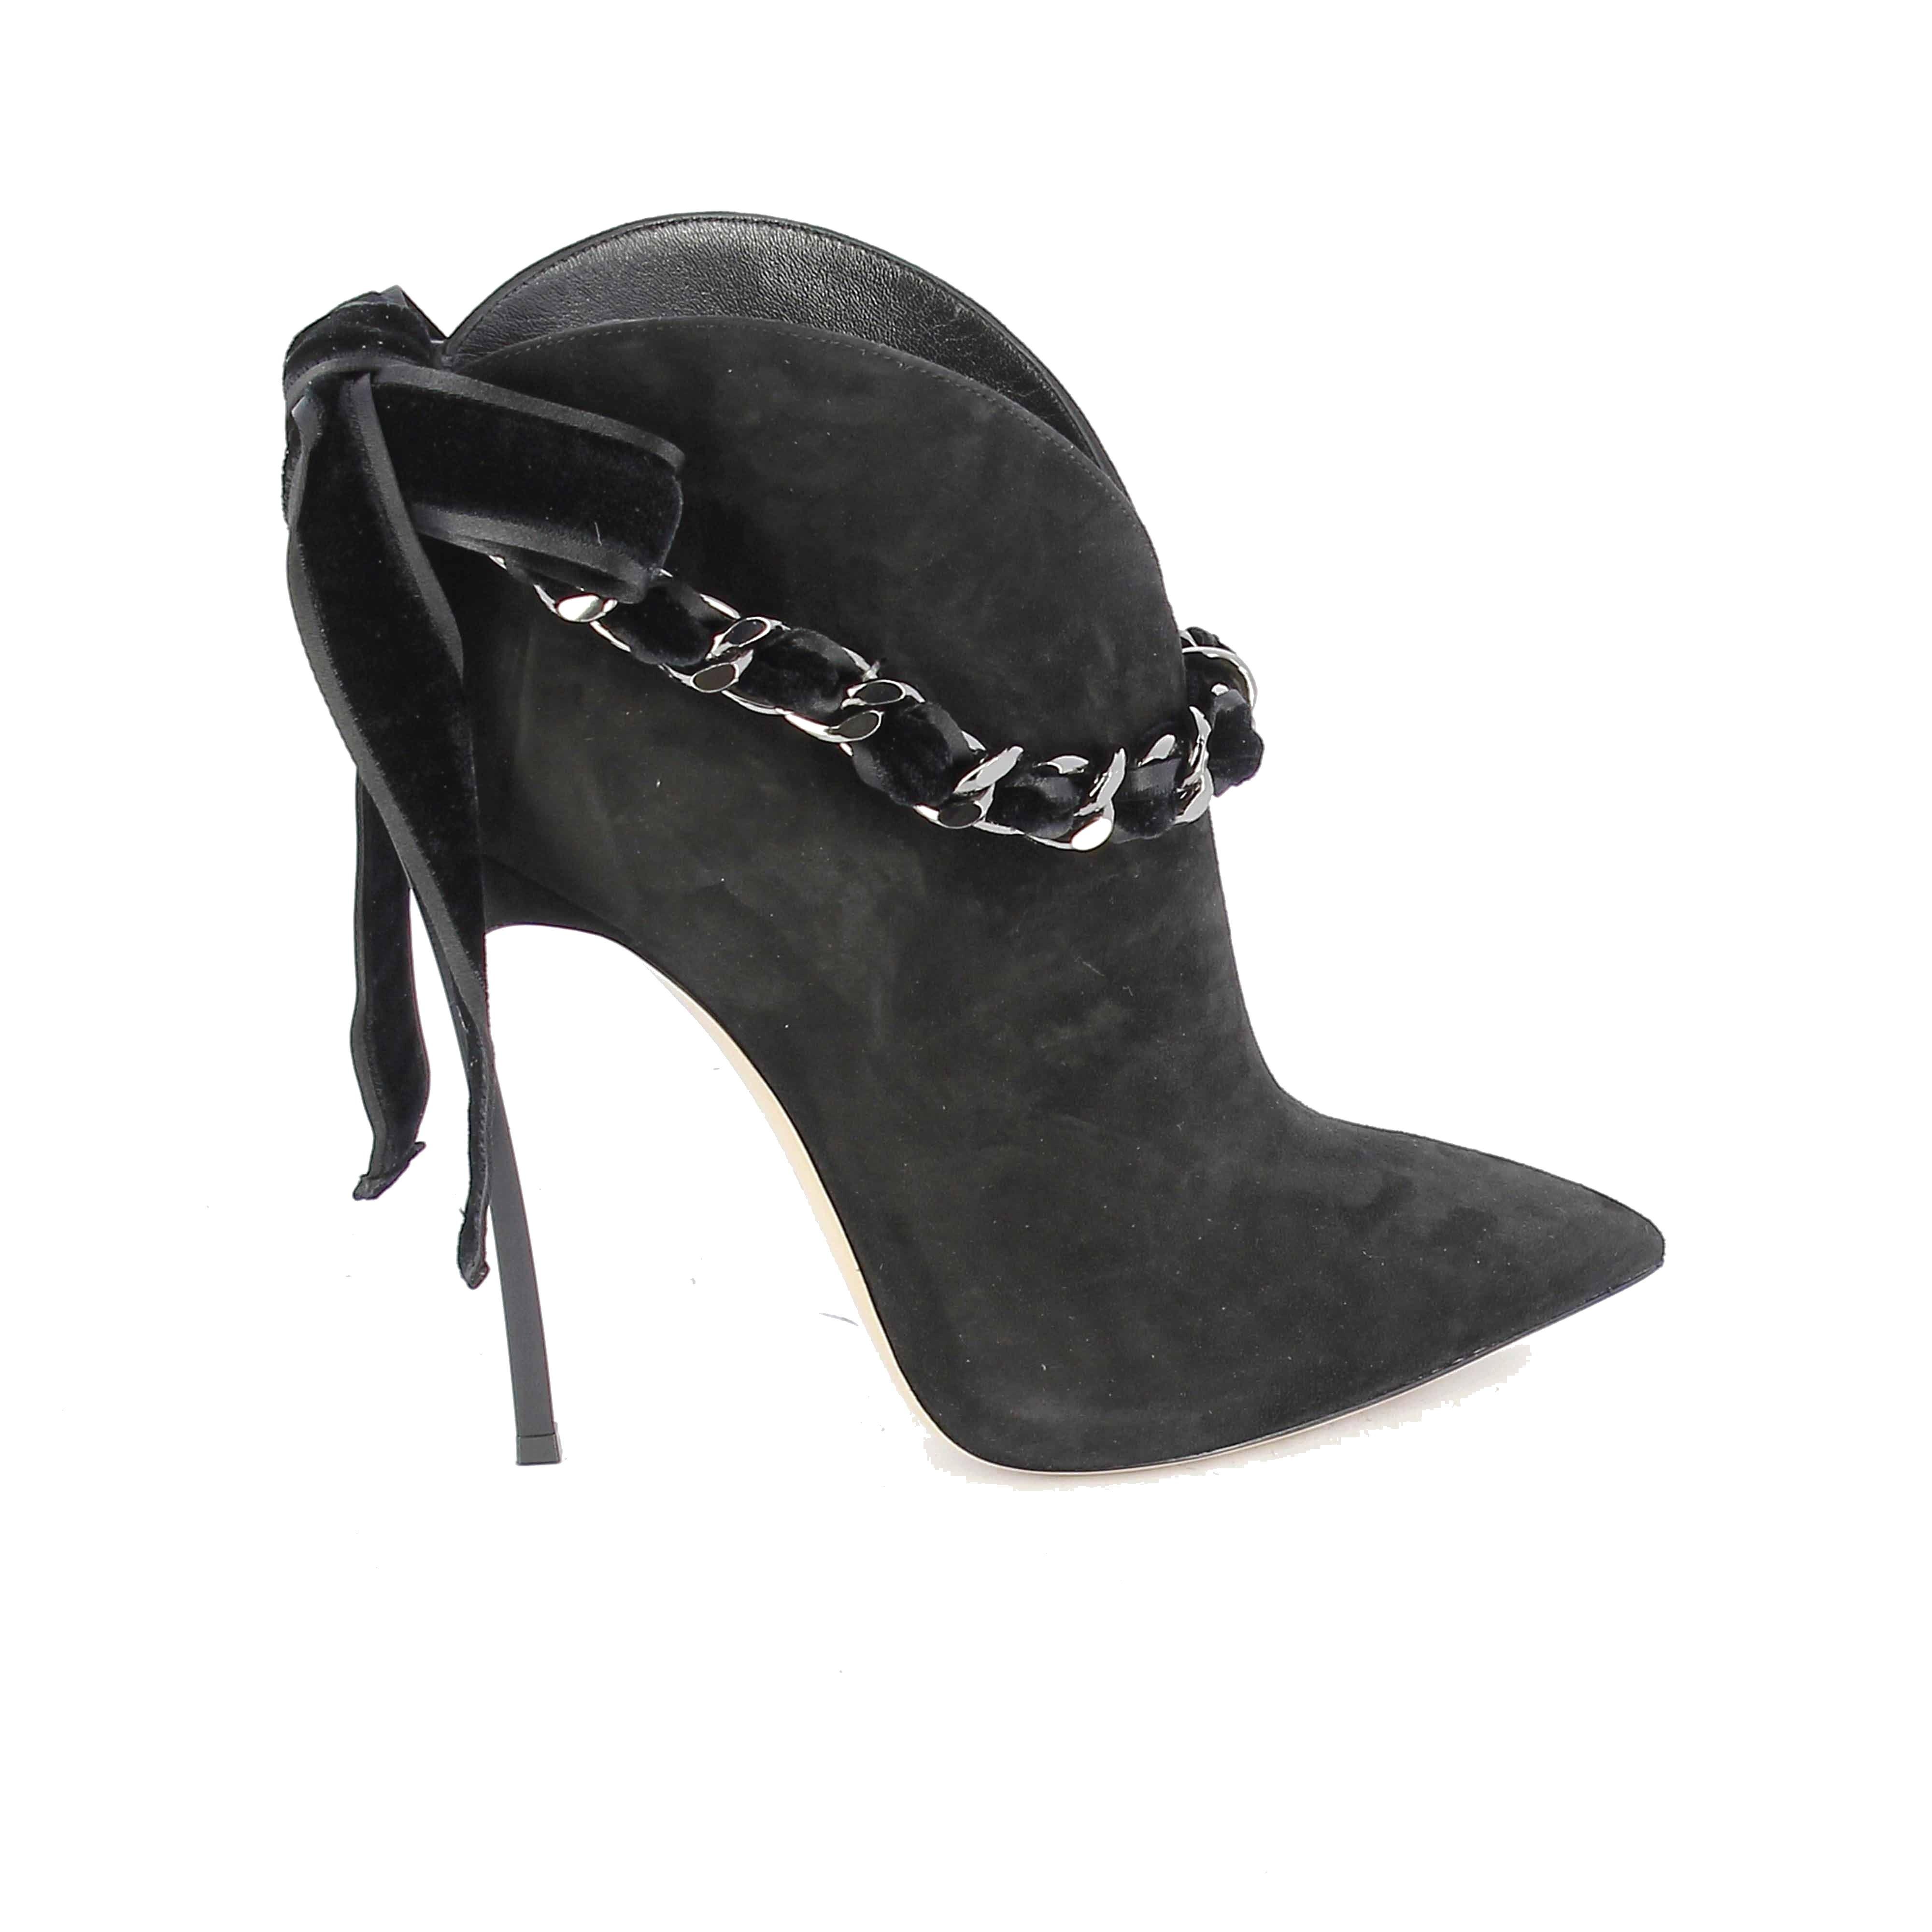 Casadei Black Suede Ankle Boots in Black - Lyst